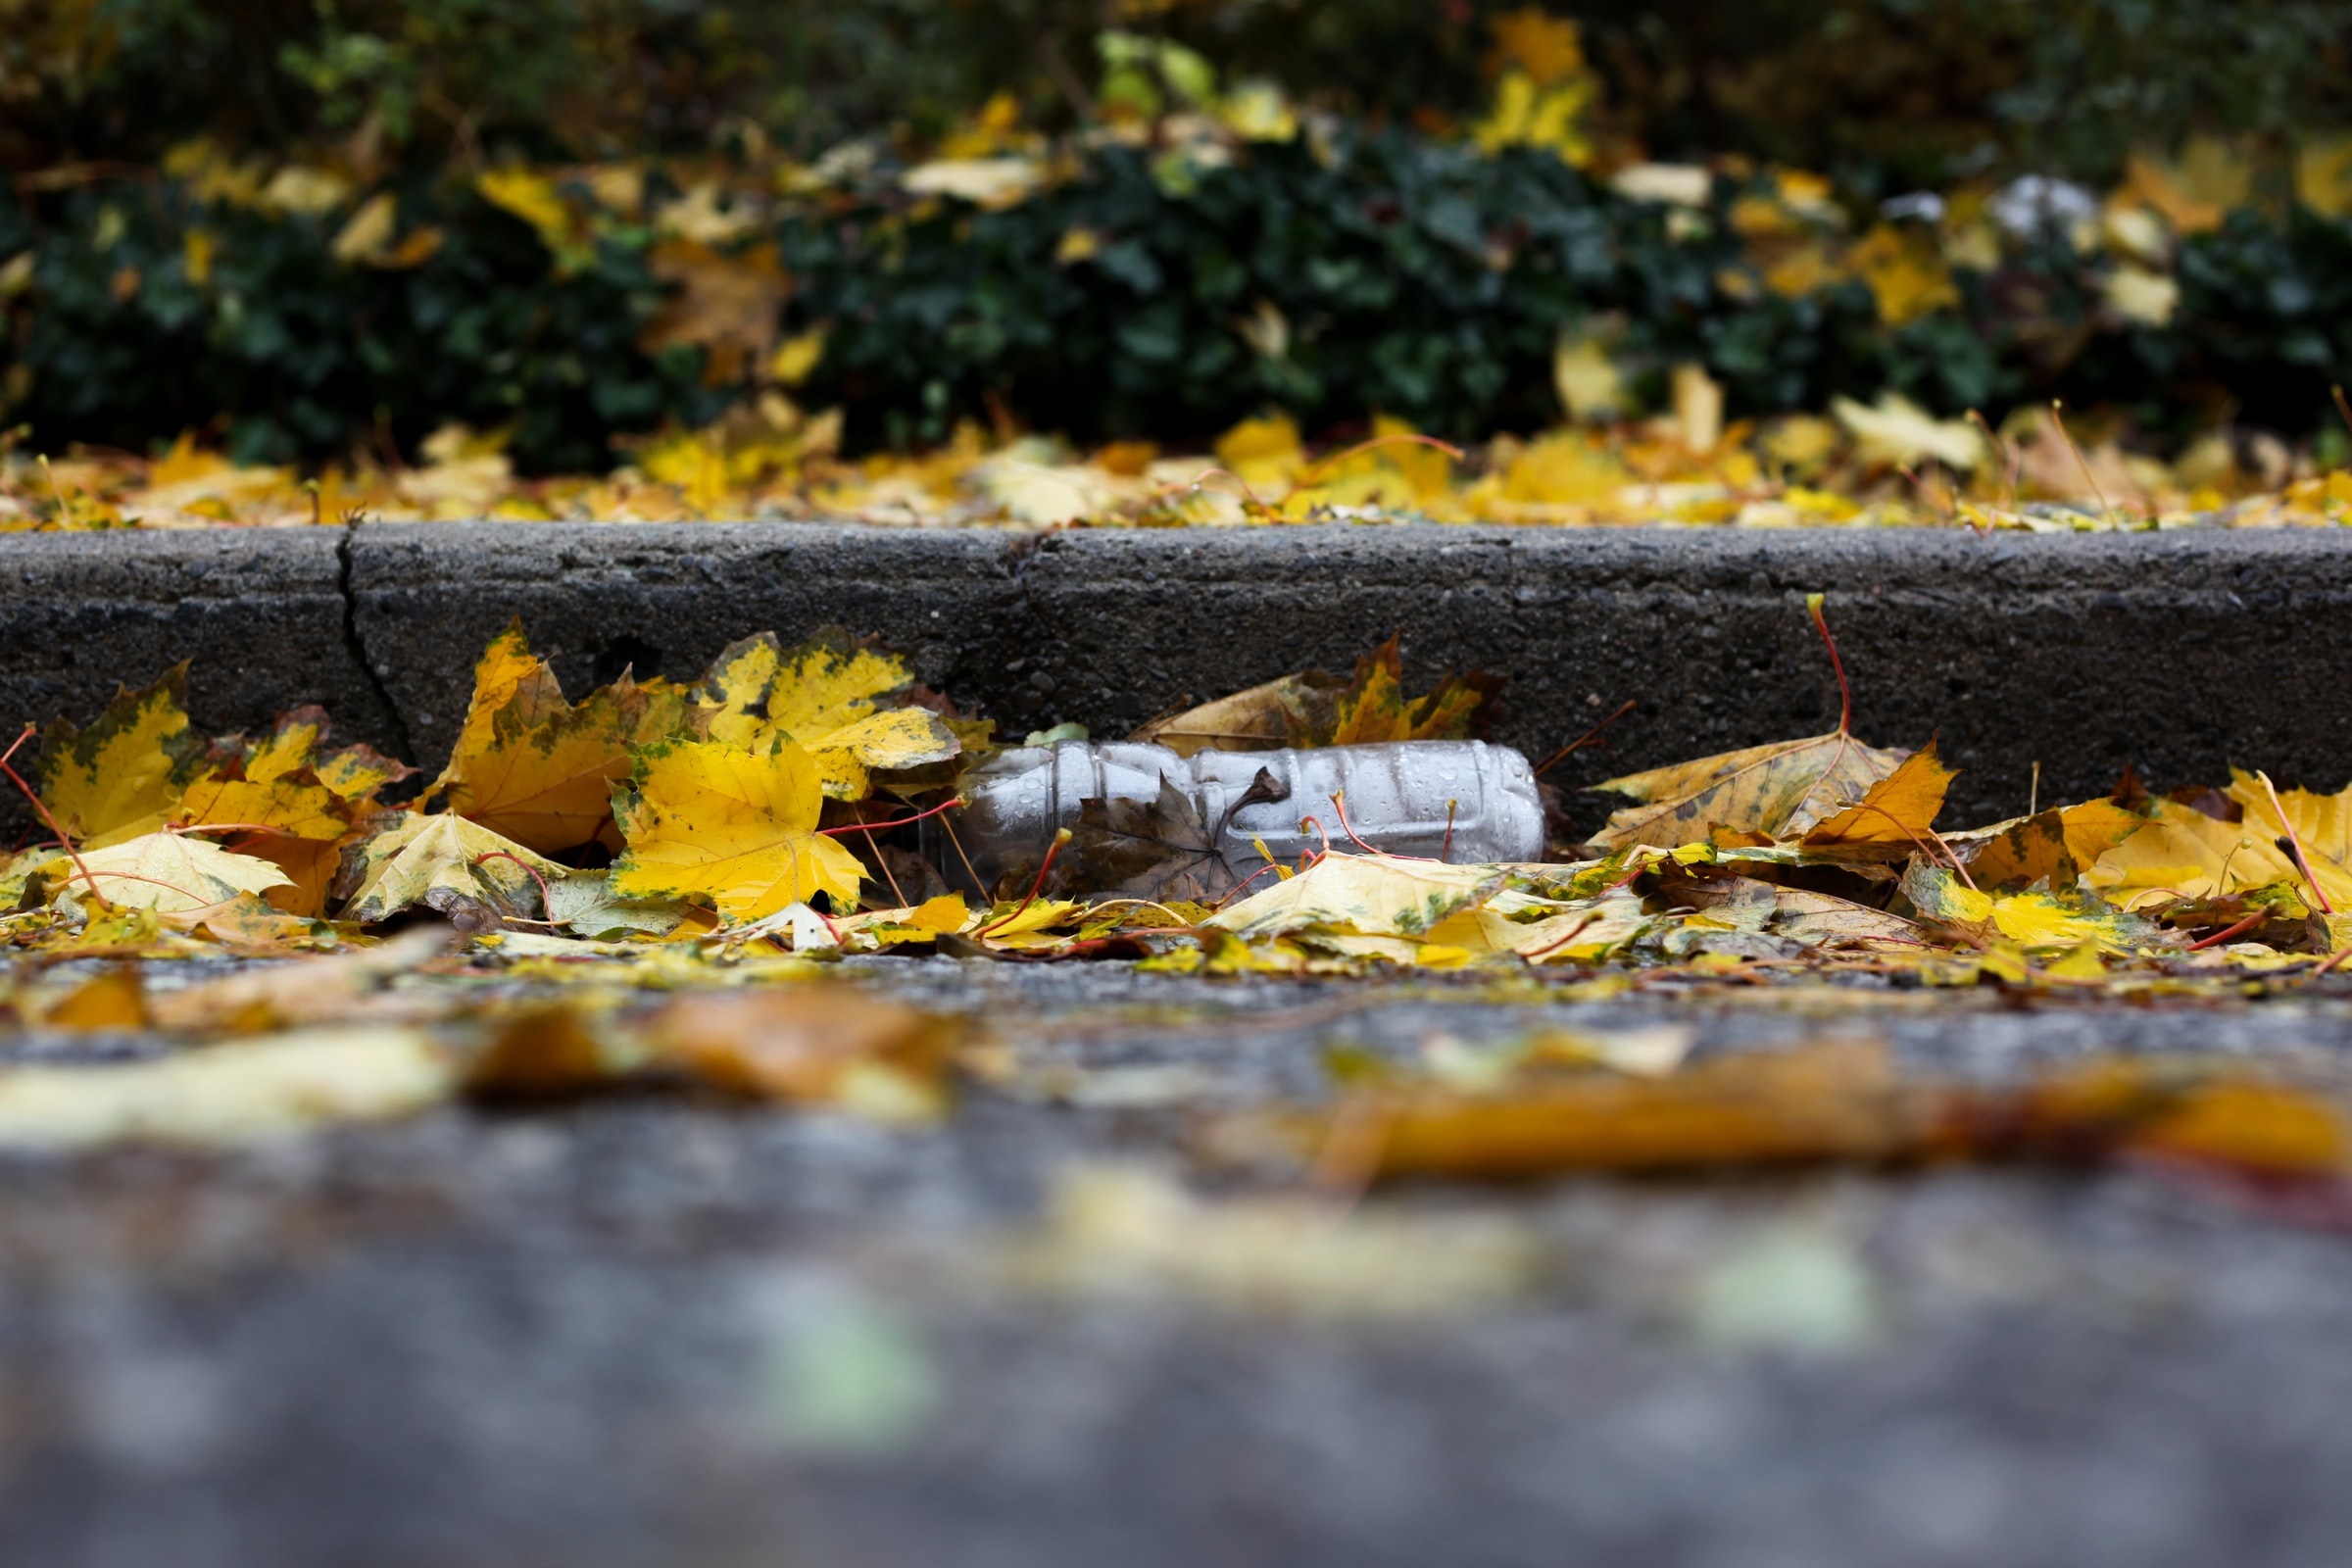 A plastic bottle in-between leaves next to a kerb